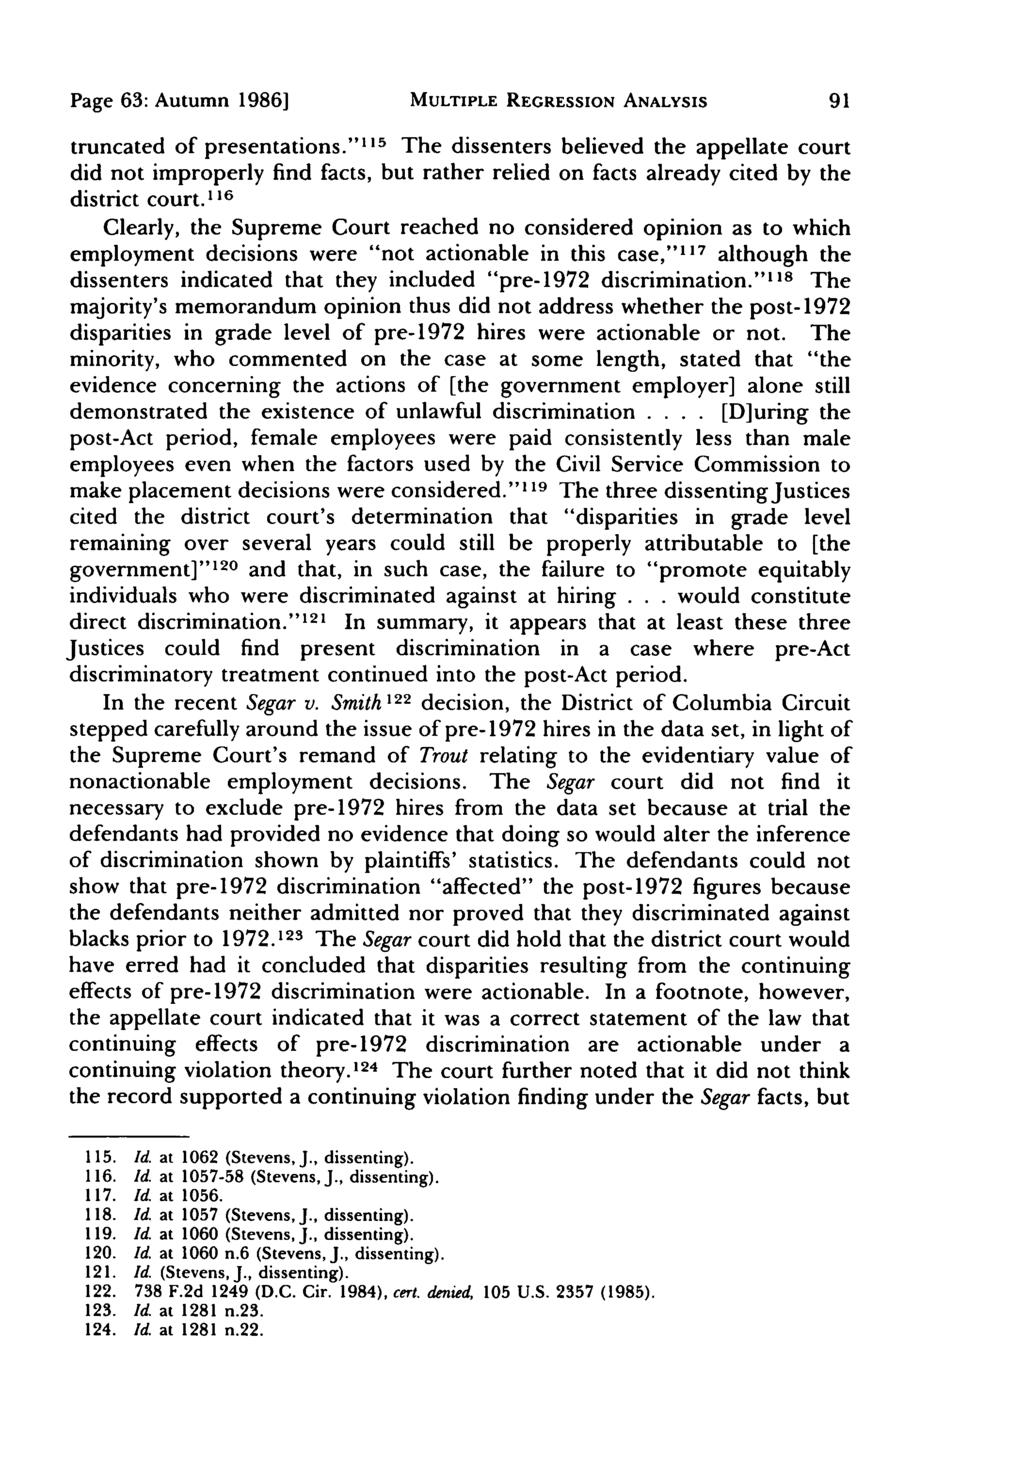 Page 63: Autumn 1986] MULTIPLE REGRESSION ANALYSIS truncated of presentations.